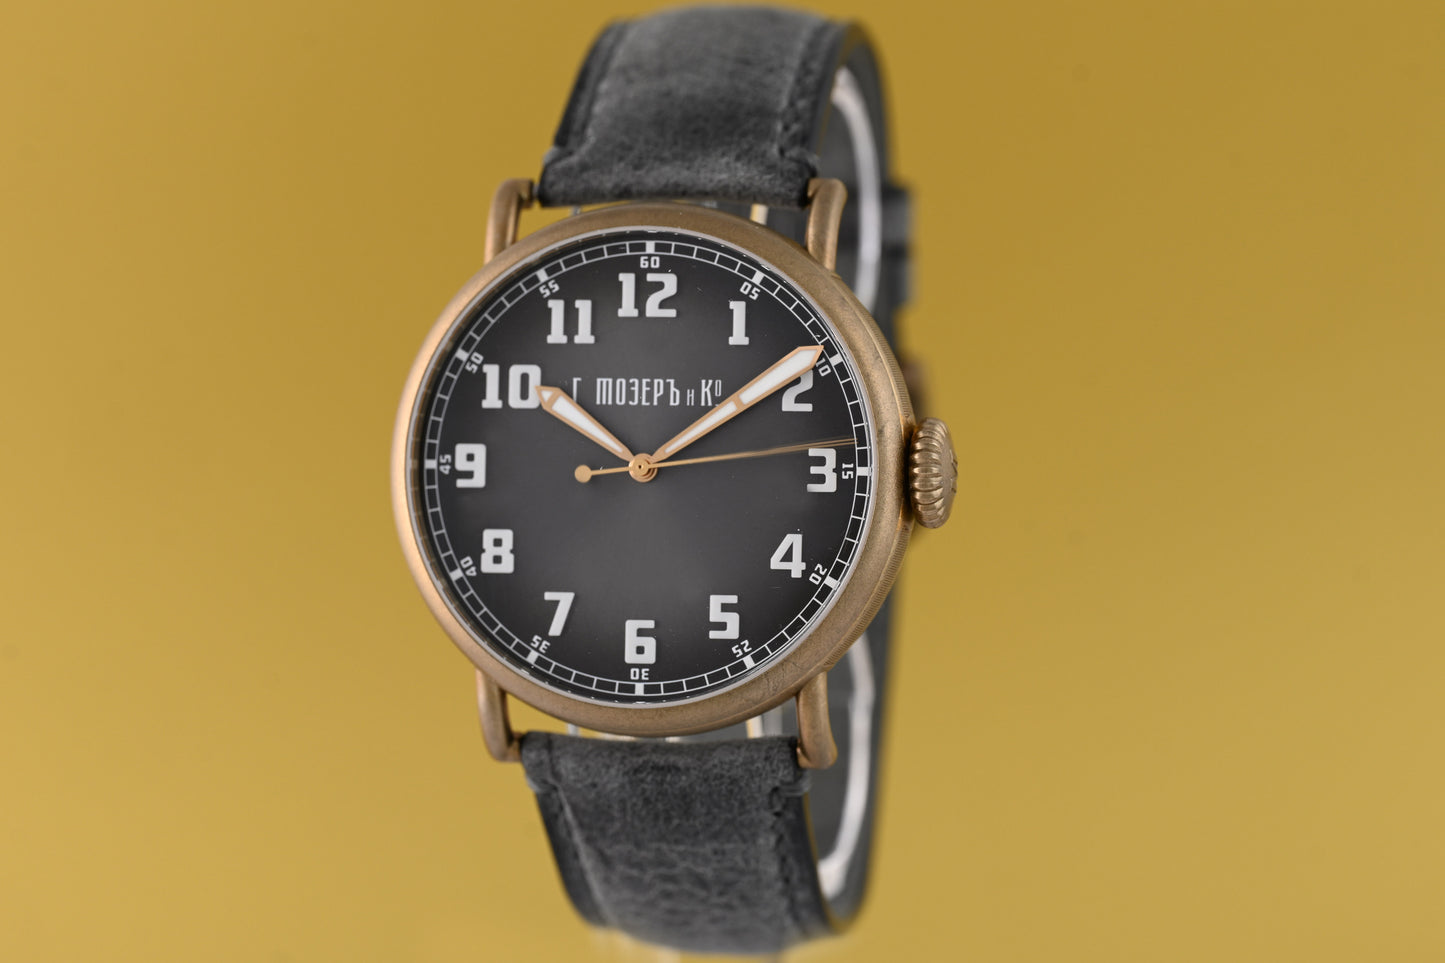 H.Moser & Cie Heritage Bronze "Since 1828" Limited Edition - Full Set